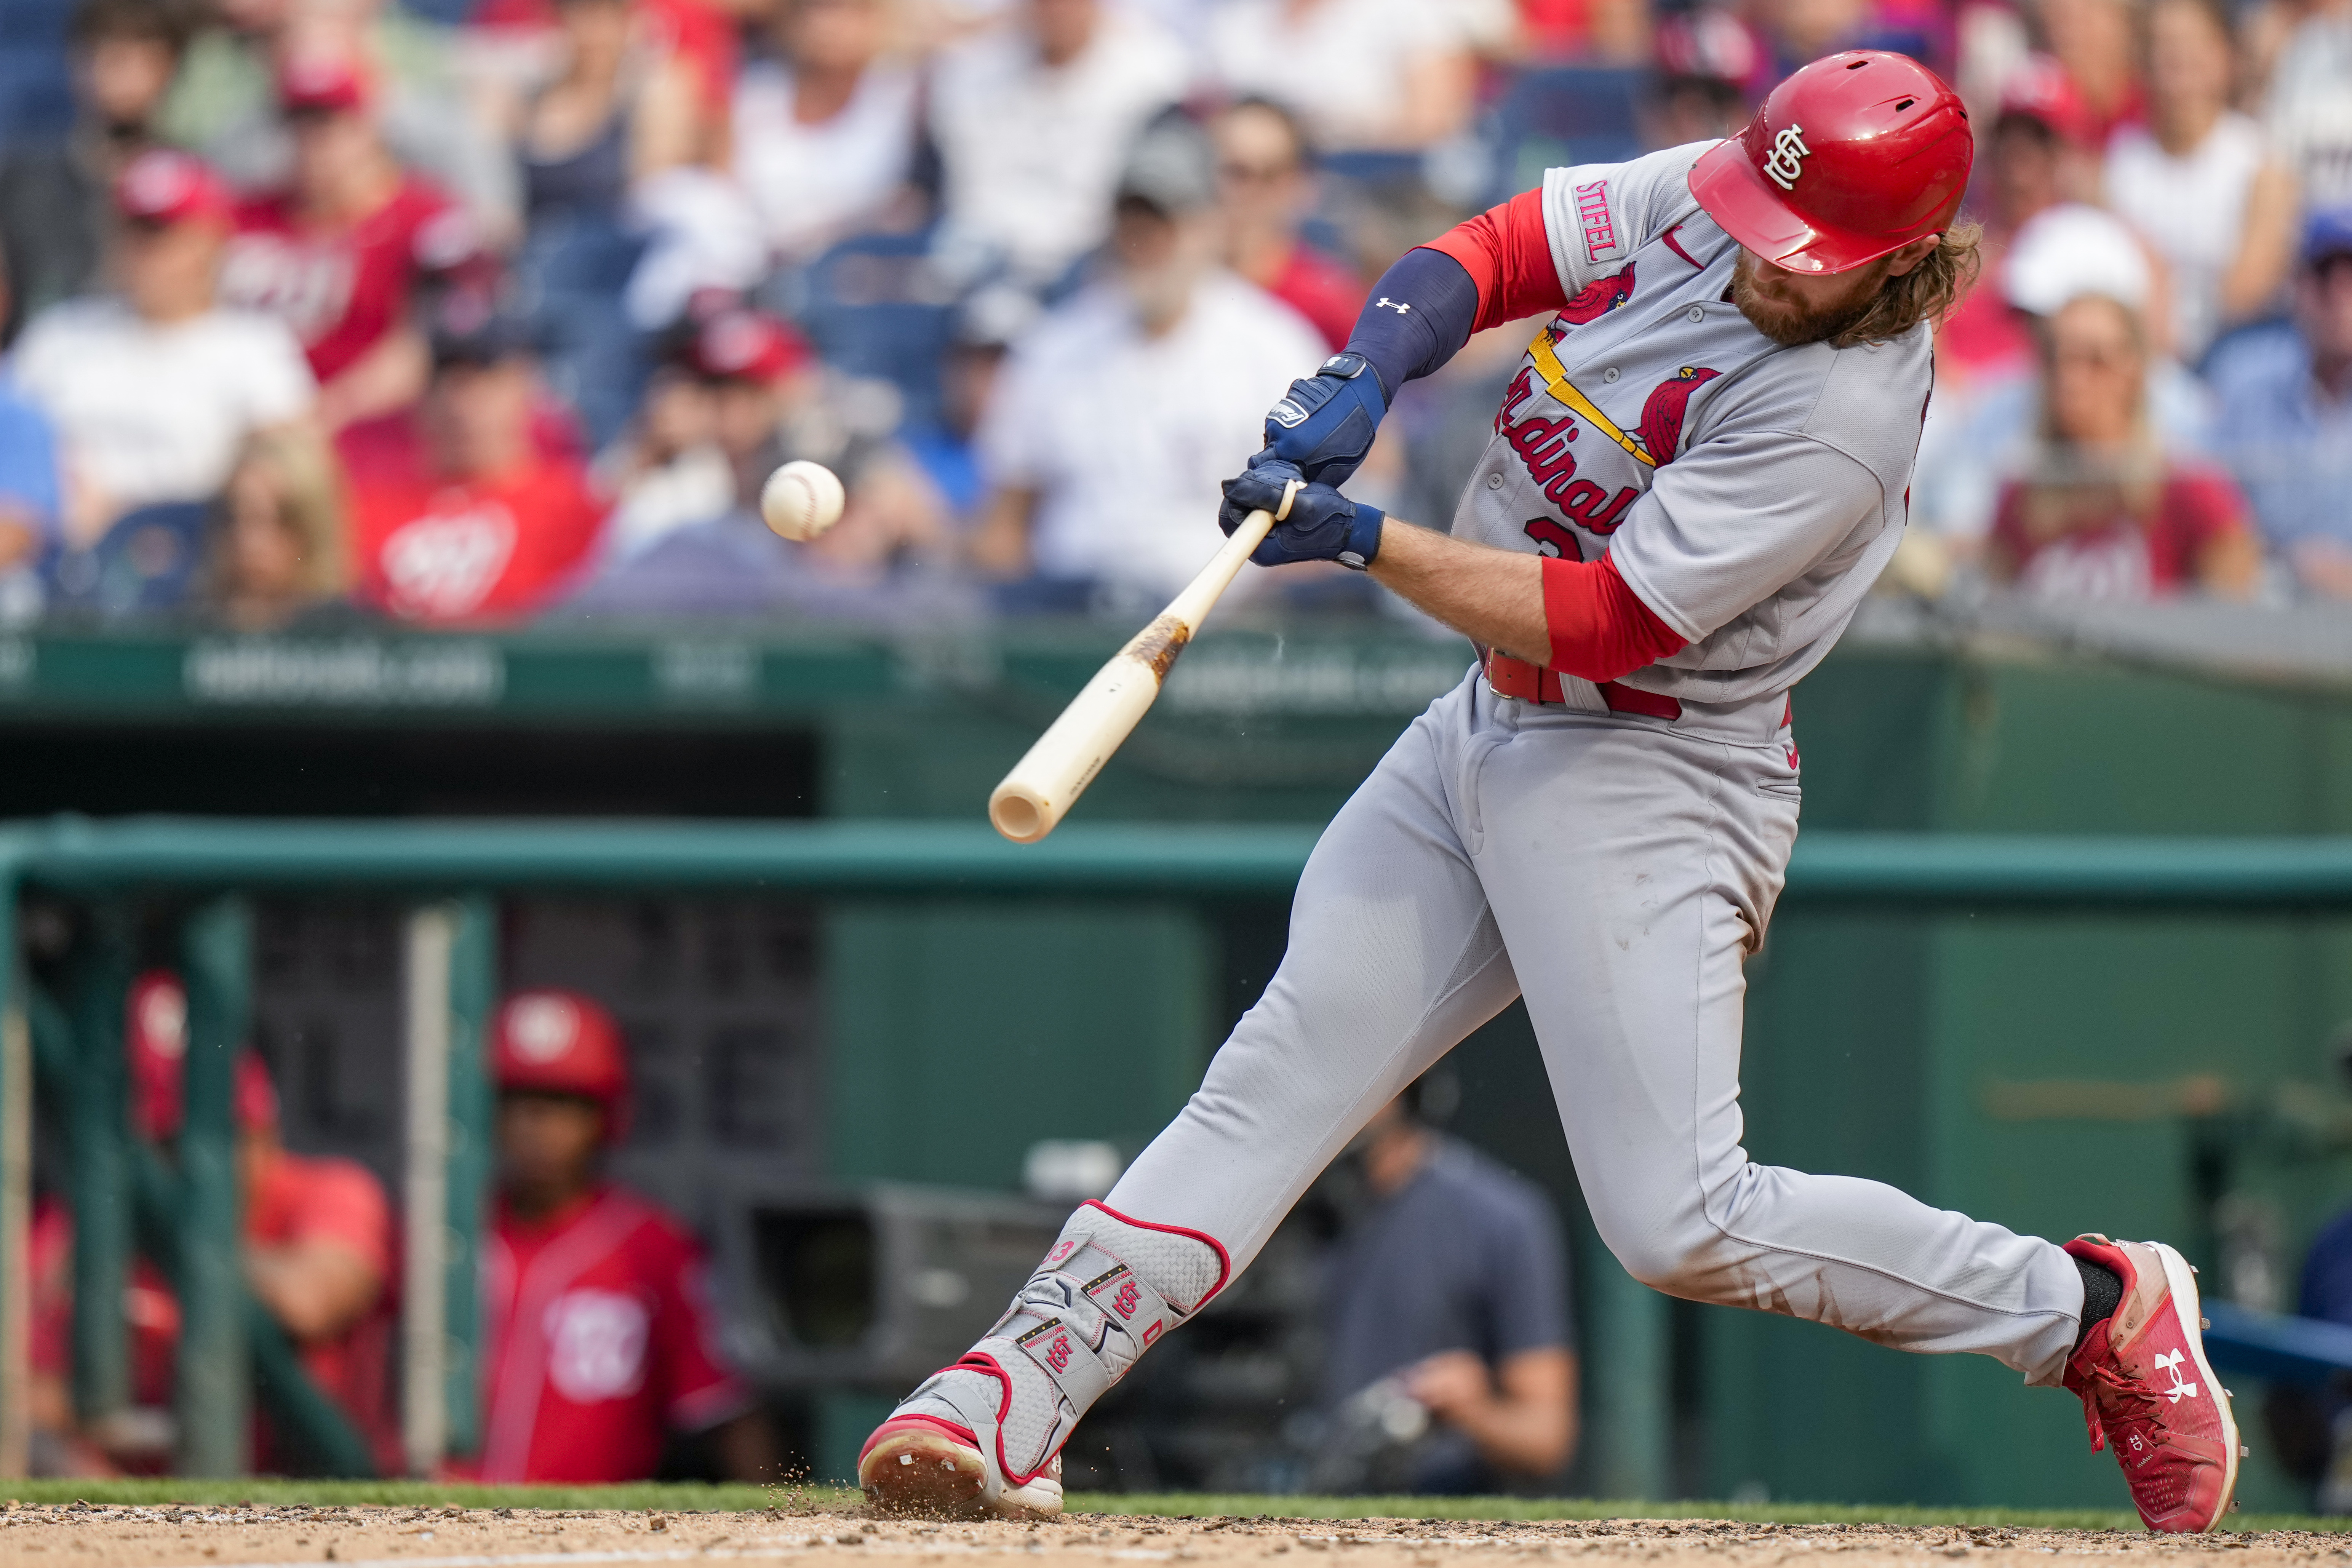 Donovan scratched from Cardinals lineup Friday with throwing arm